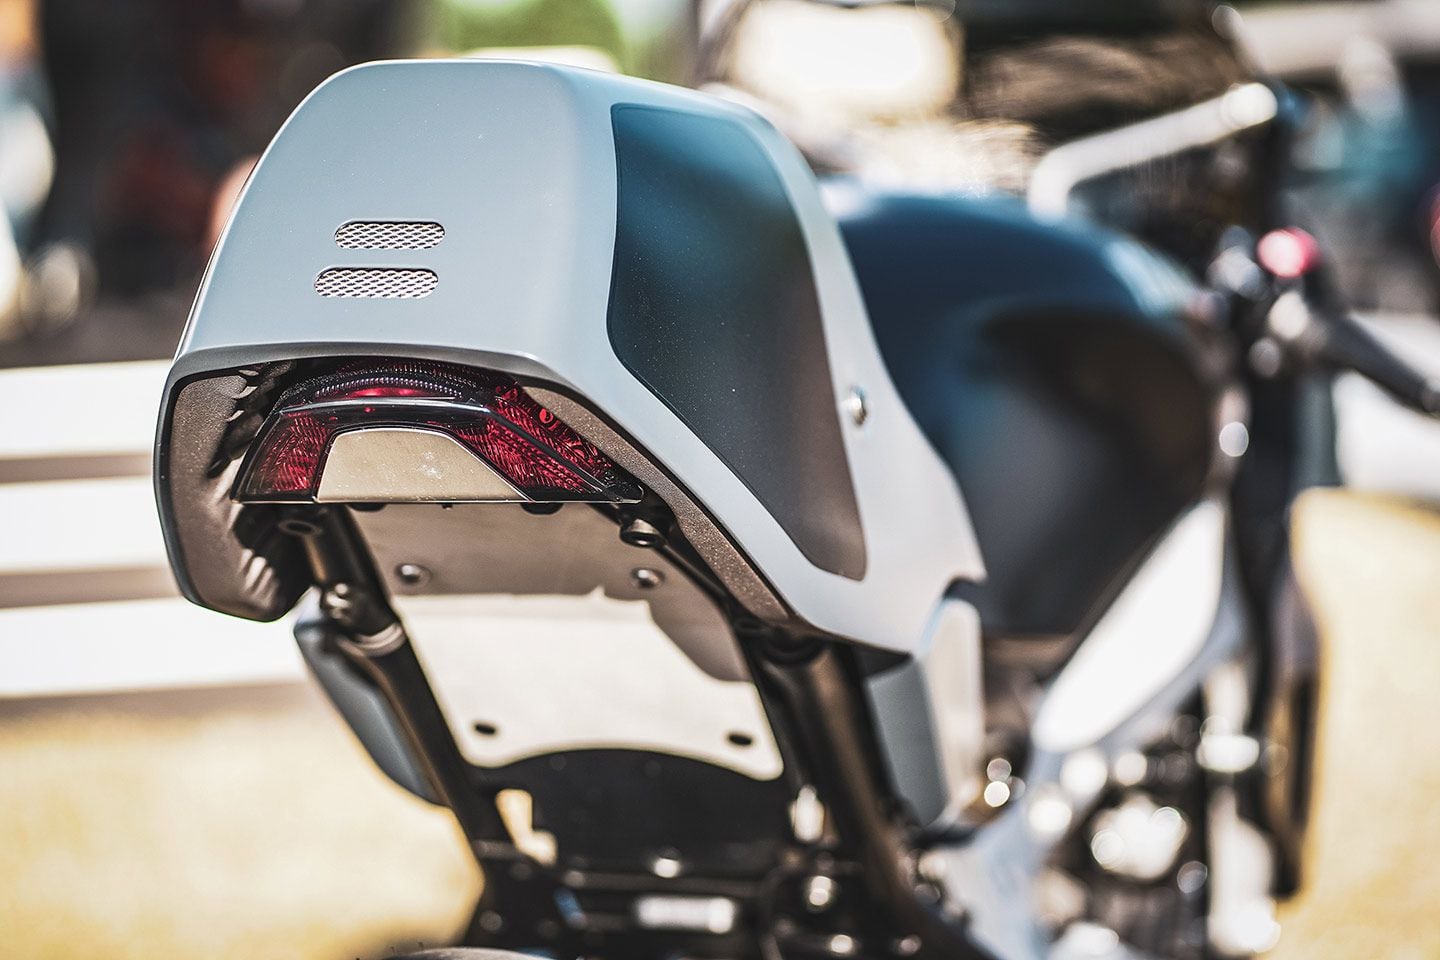 The single-seat rear end of the XSR900 DB40.